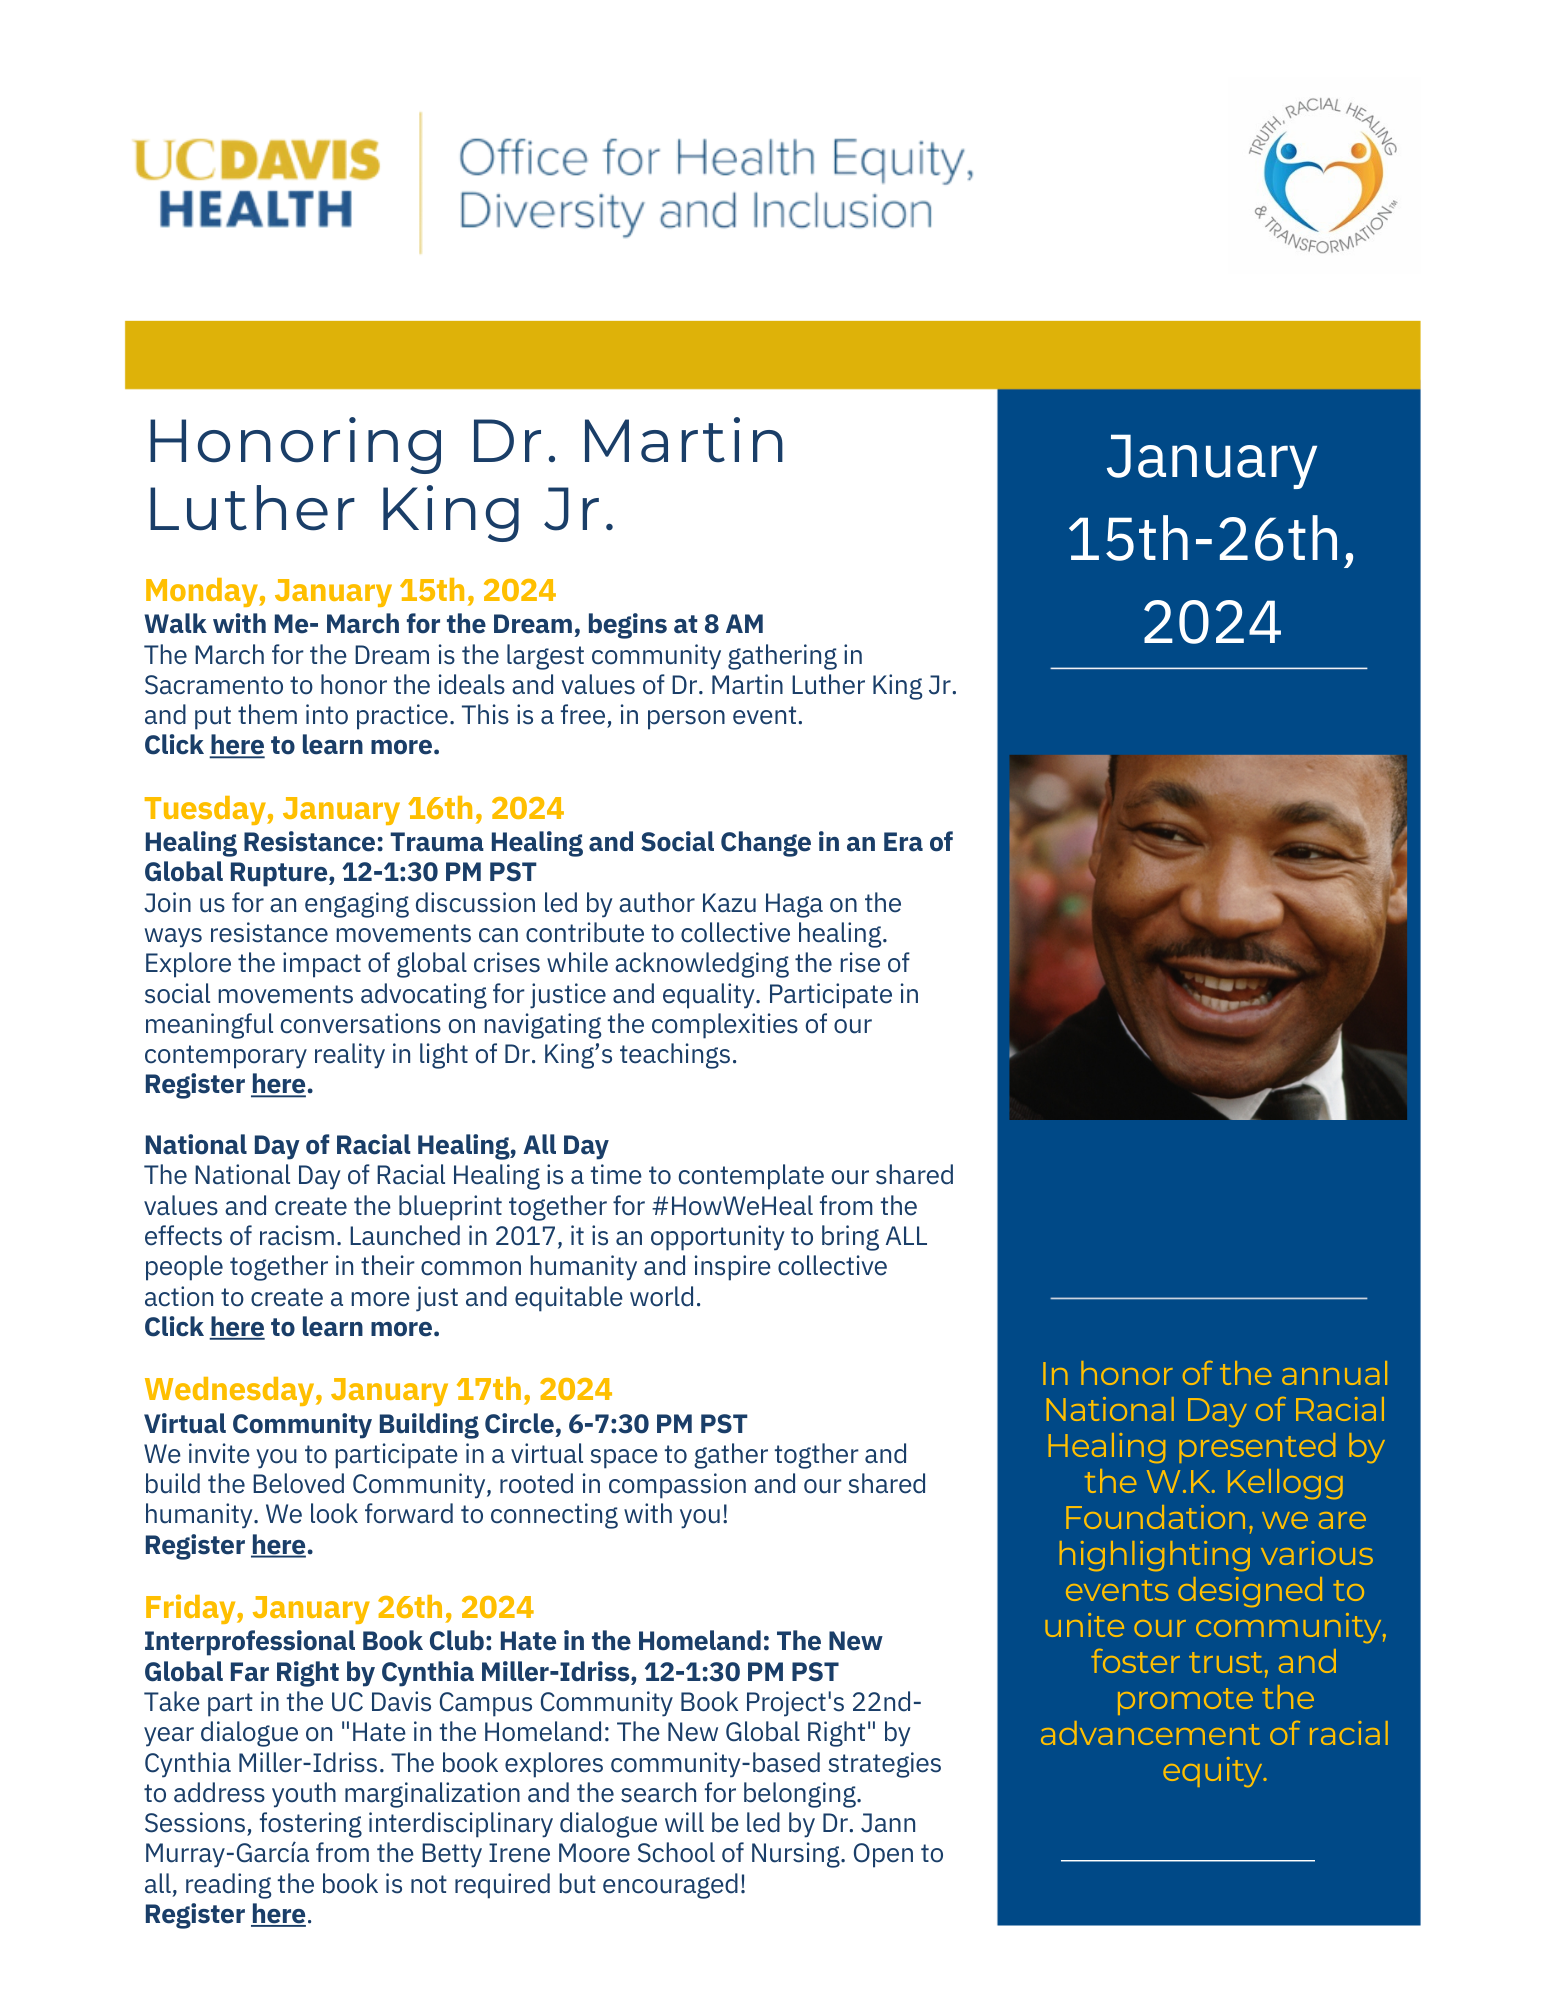 January 2024 Events Honoring Dr. Martin Luther King Jr.